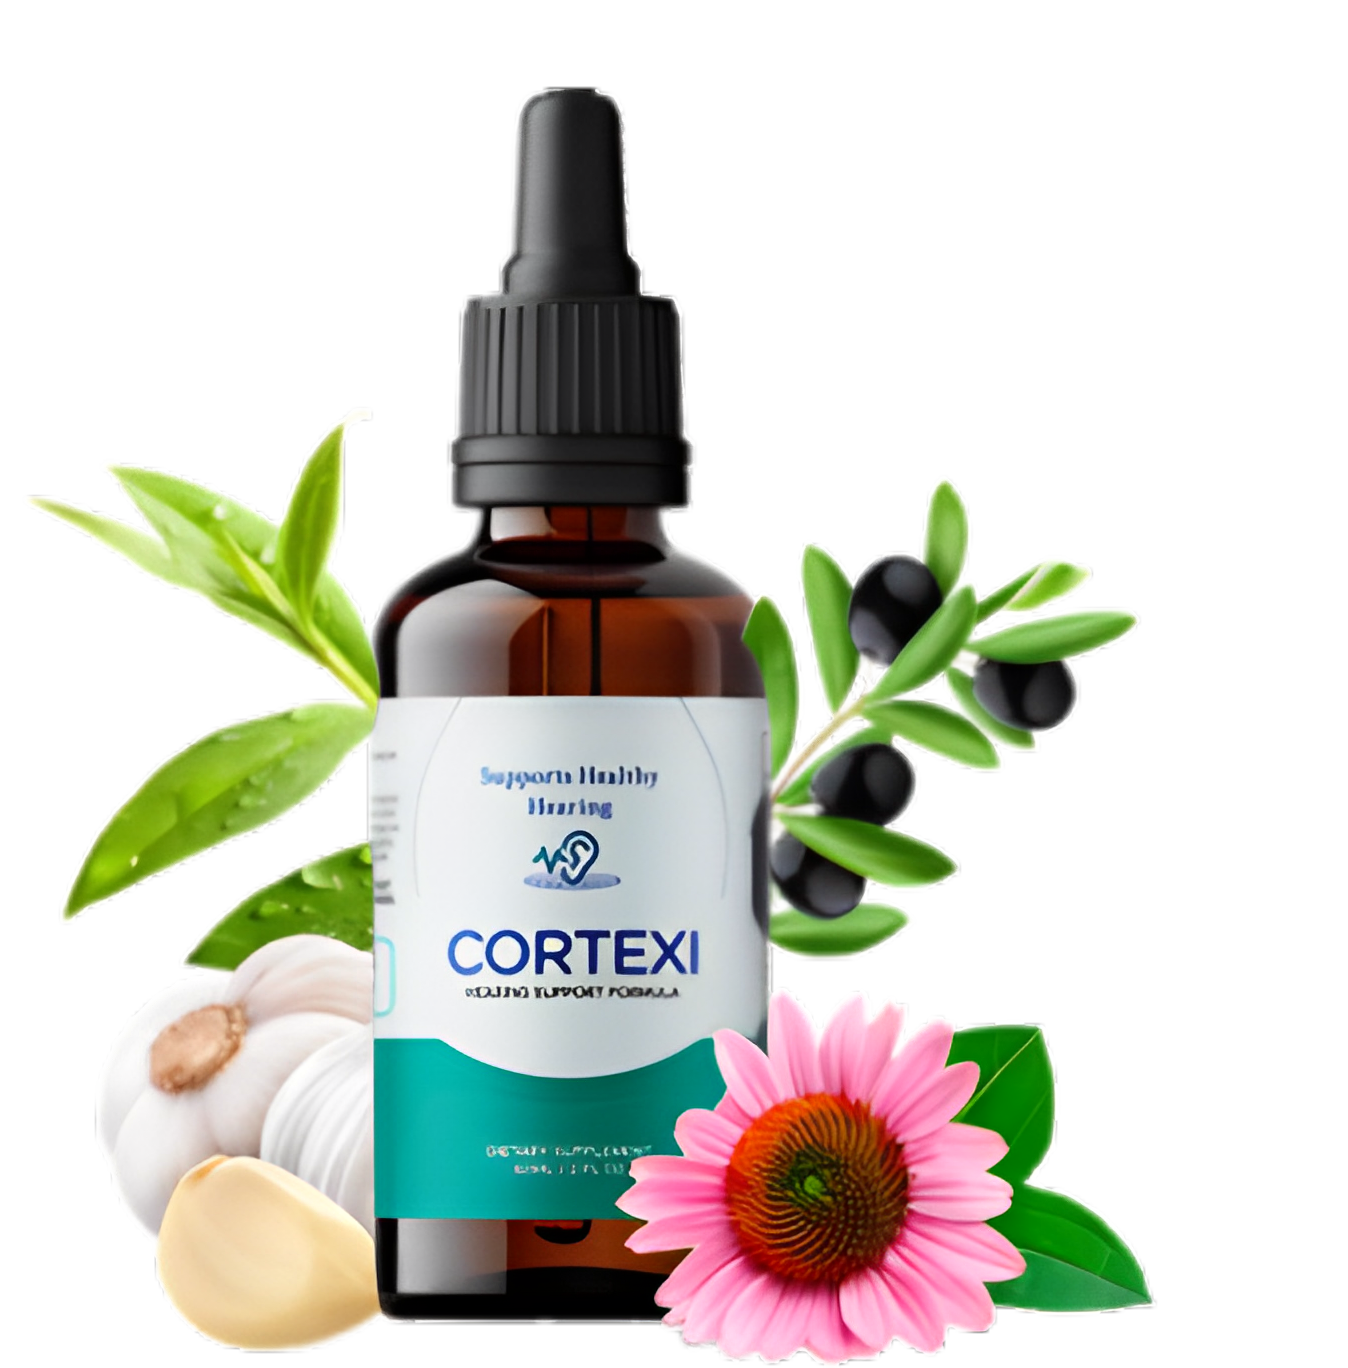 Cortexi - The Ultimate Ear Health Supplement